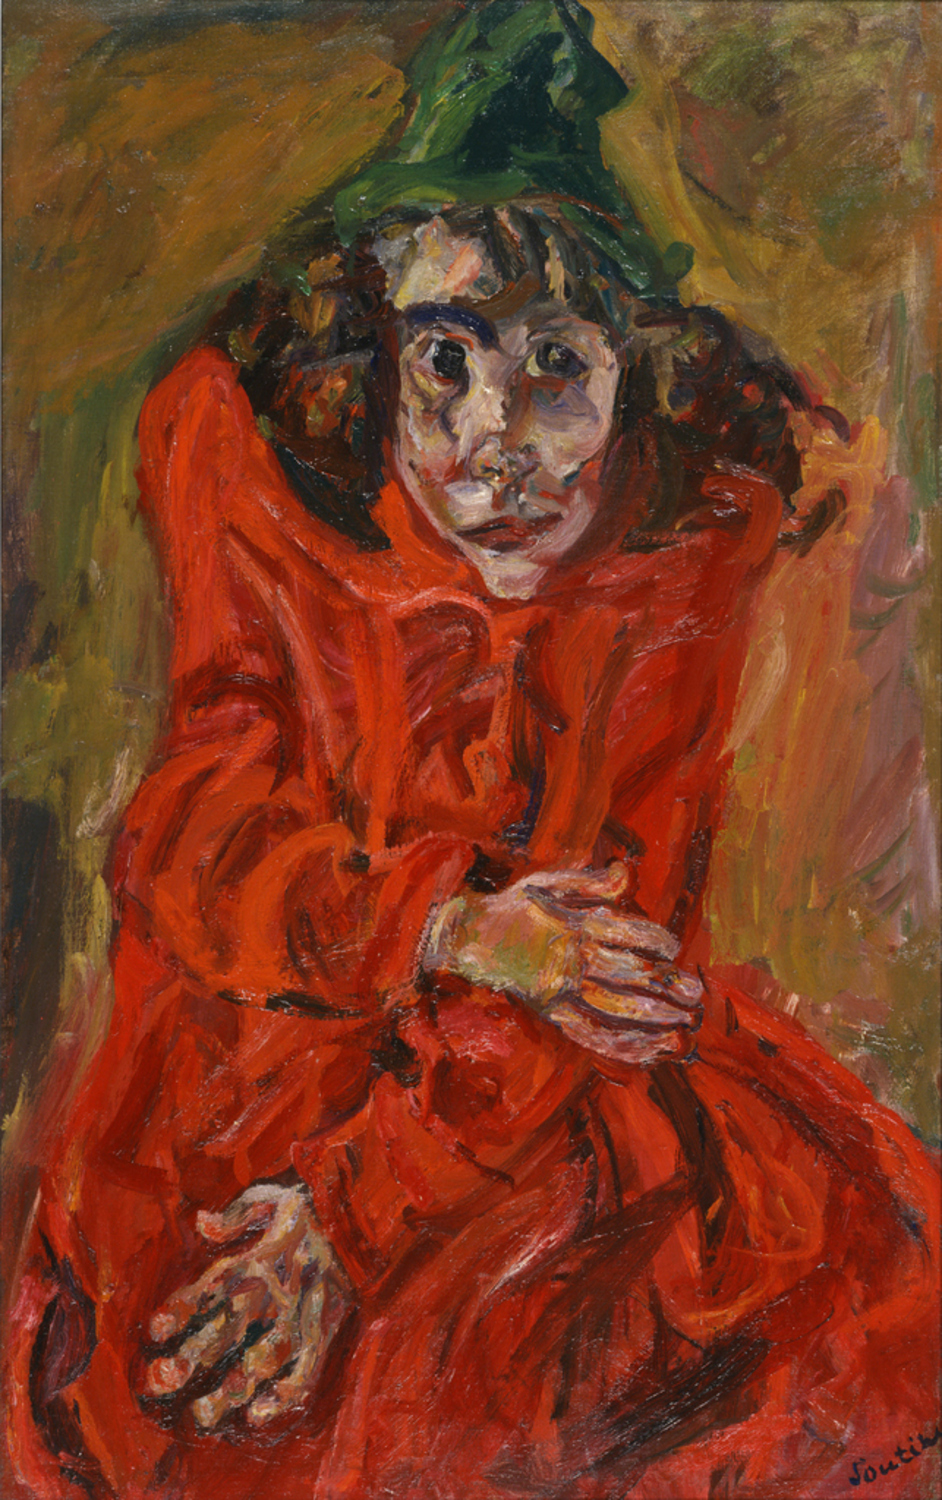 Chaïm Soutine Mad Woman, 1920, oil on canvas, 96 x 60 cm (Collection National Museum of Western Art, Tokyo)